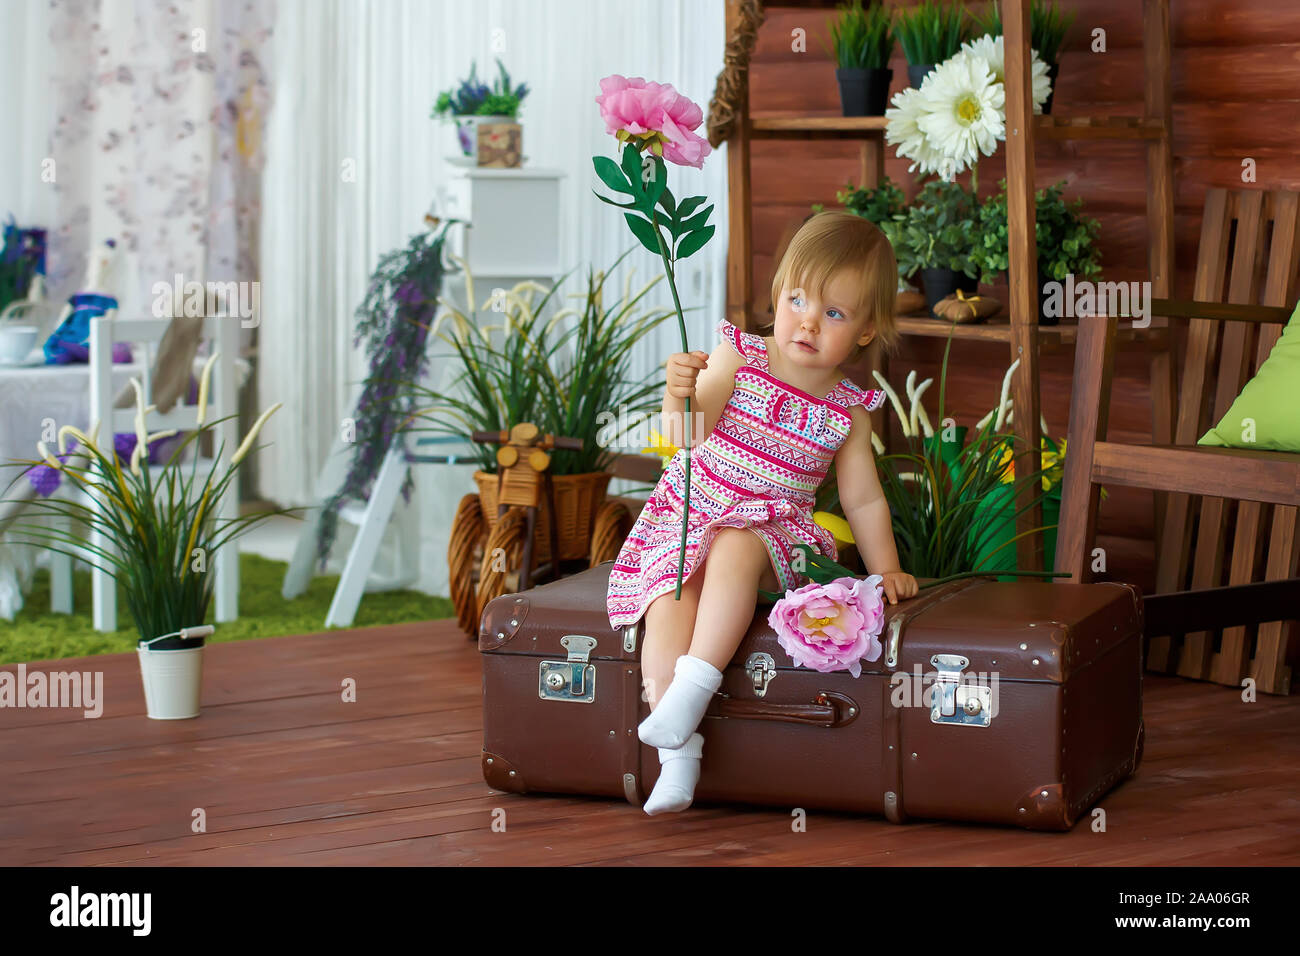 Little girl with a big flower sitting on a suitcase Stock Photo